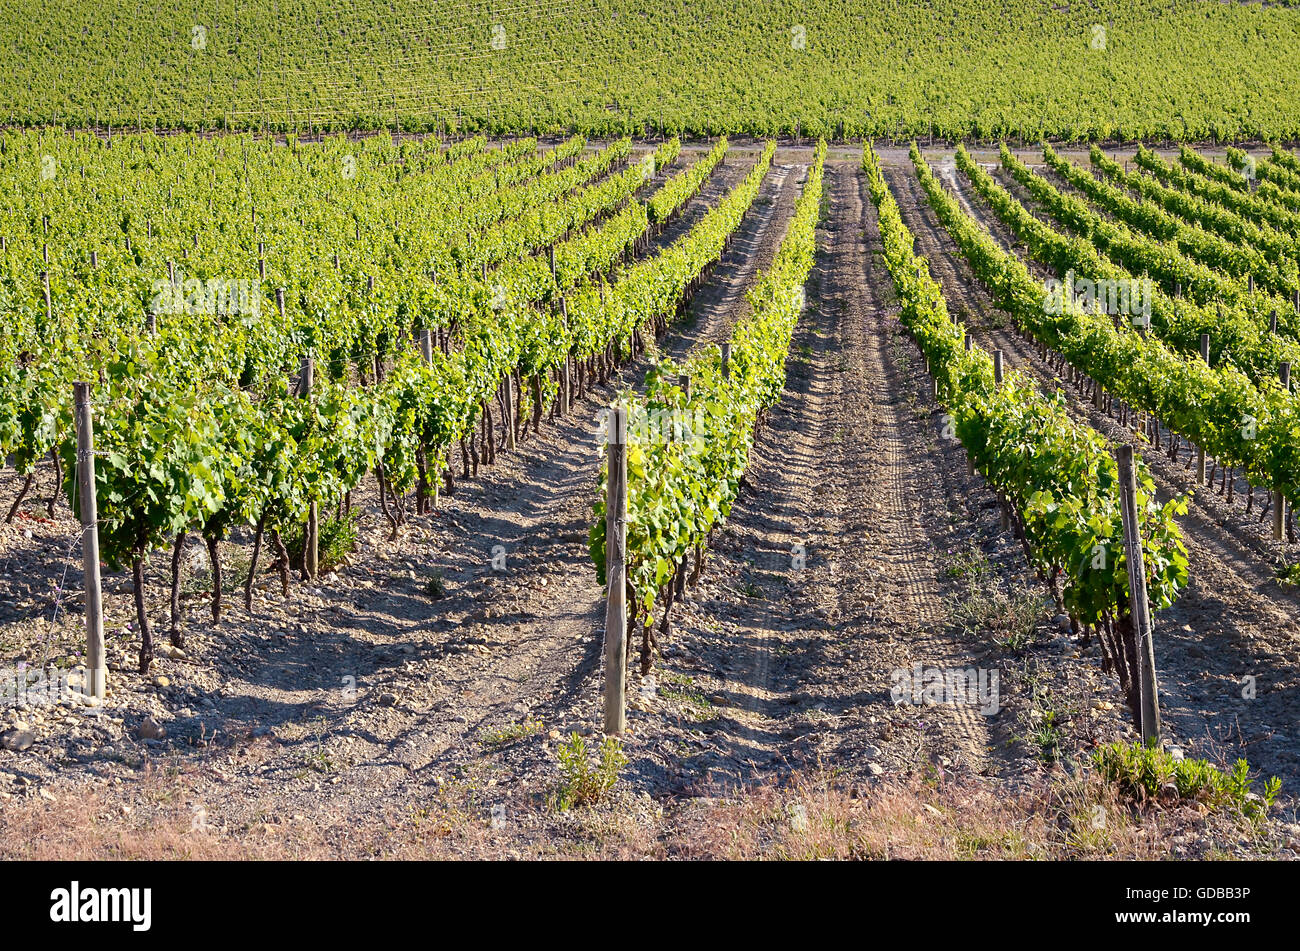 Vine near of Narbonne in southern France in the Languedoc-Roussillon region Stock Photo